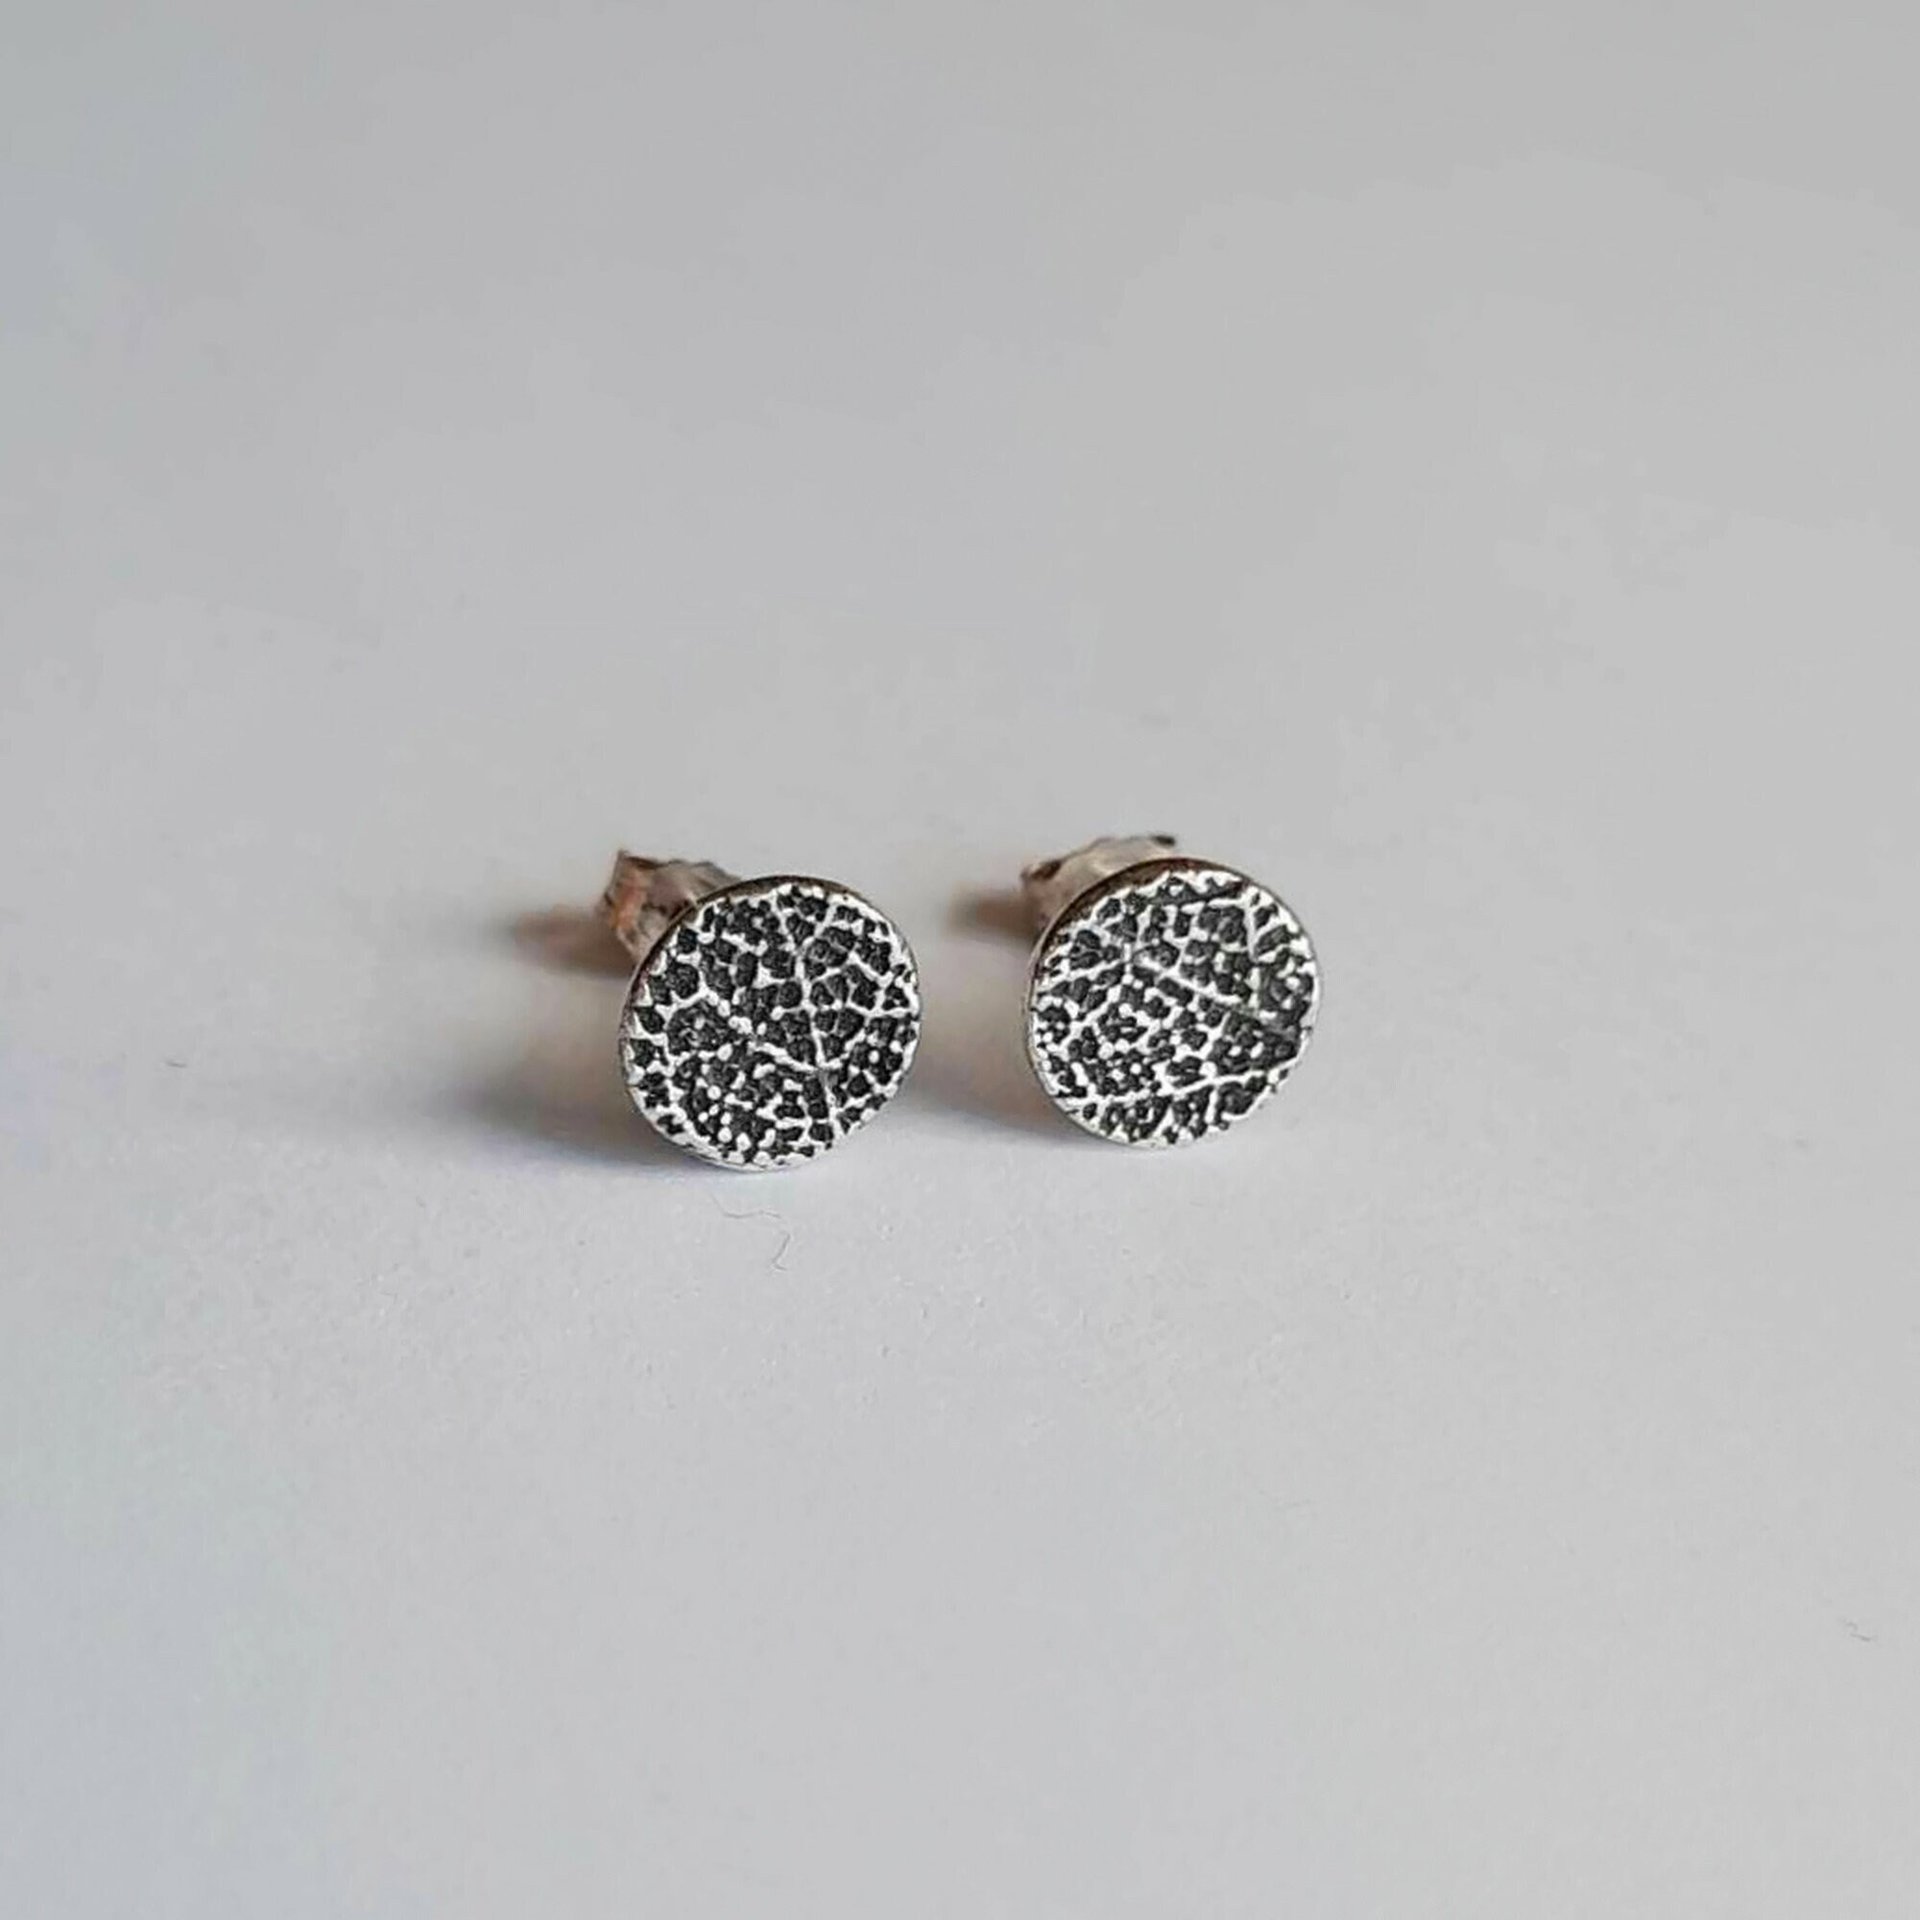 Fine Silver and Sterling Silver Disc Earrings with Sage Leaf Pattern ~ Hand Made by The Tiny Tree Frog Jewellery